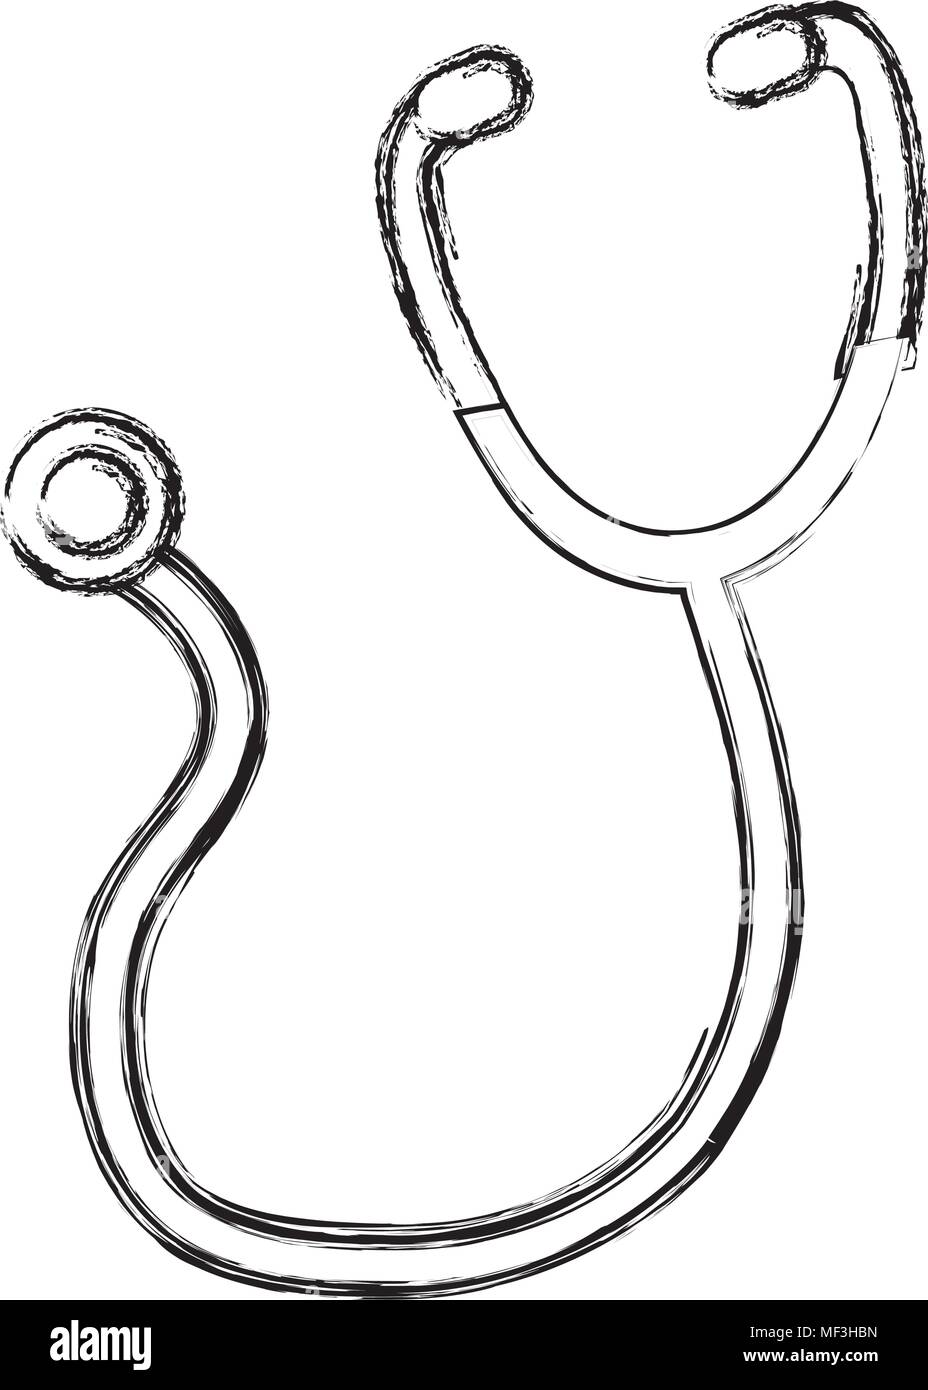 grunge medical stethoscope tool to beat sign vector illustration Stock Vector